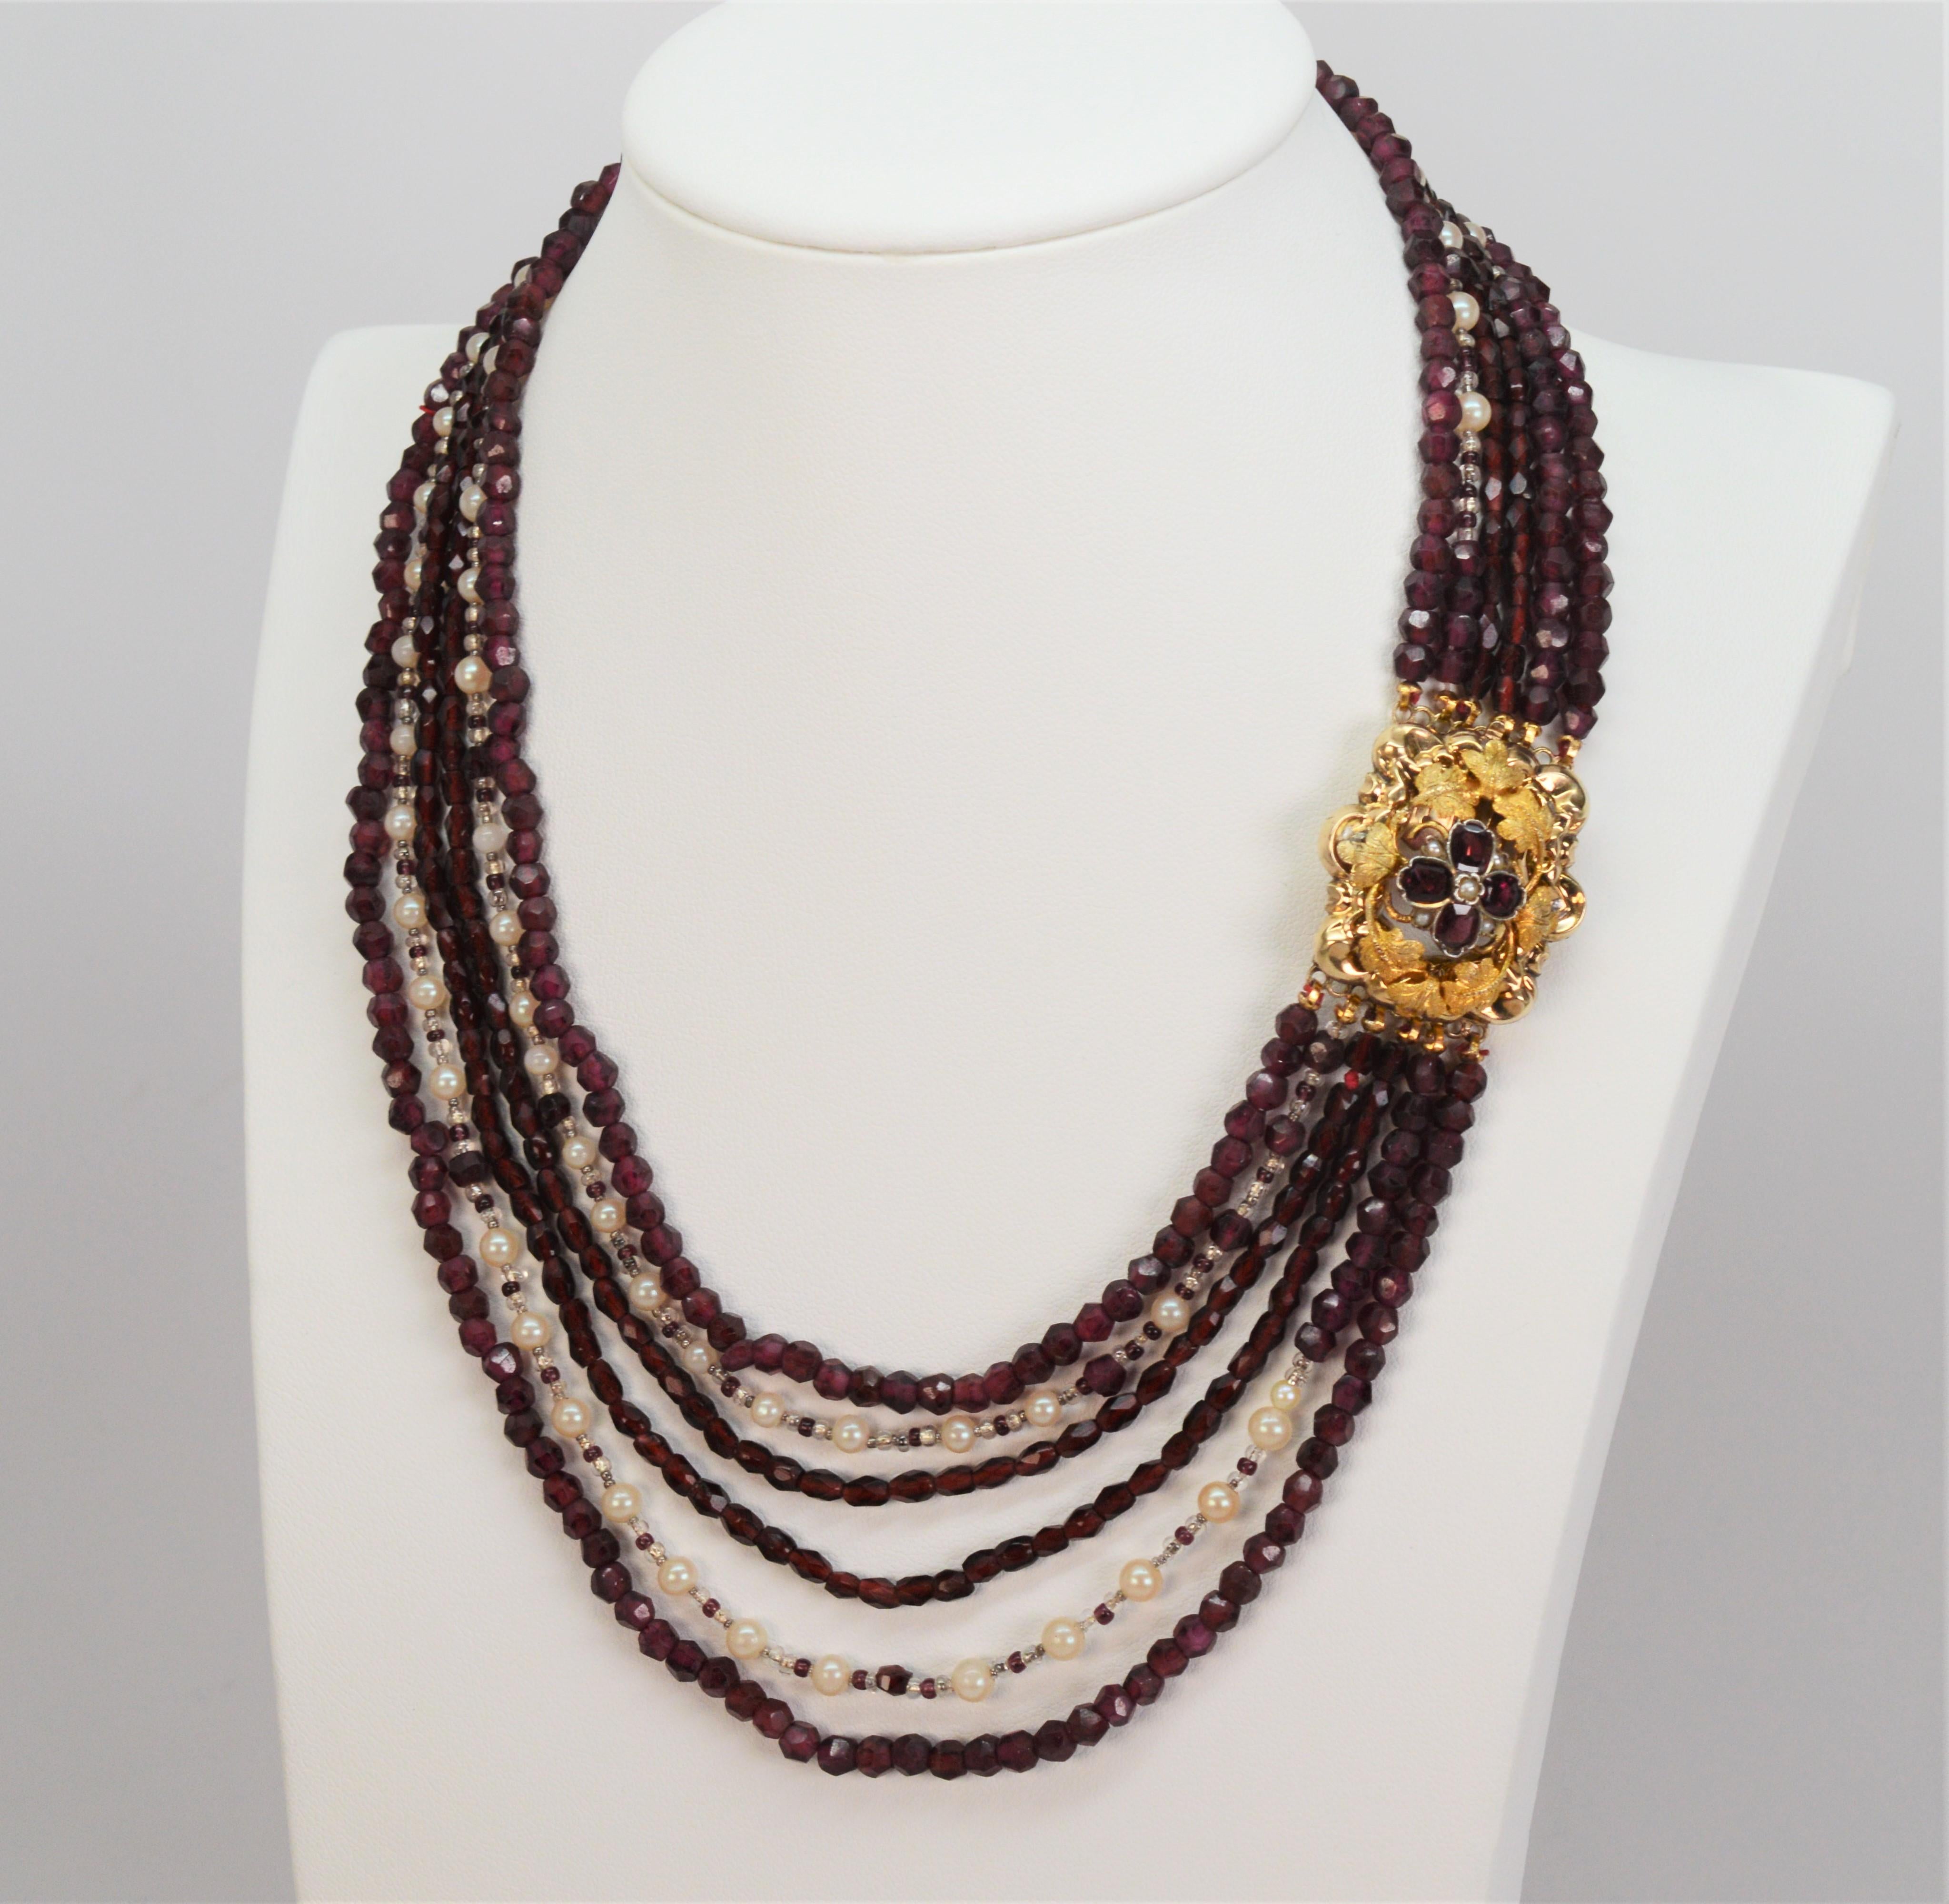 Women's Garnet Pearl Multi Strand Necklace with Fancy Antique Jeweled Yellow Gold Clasp